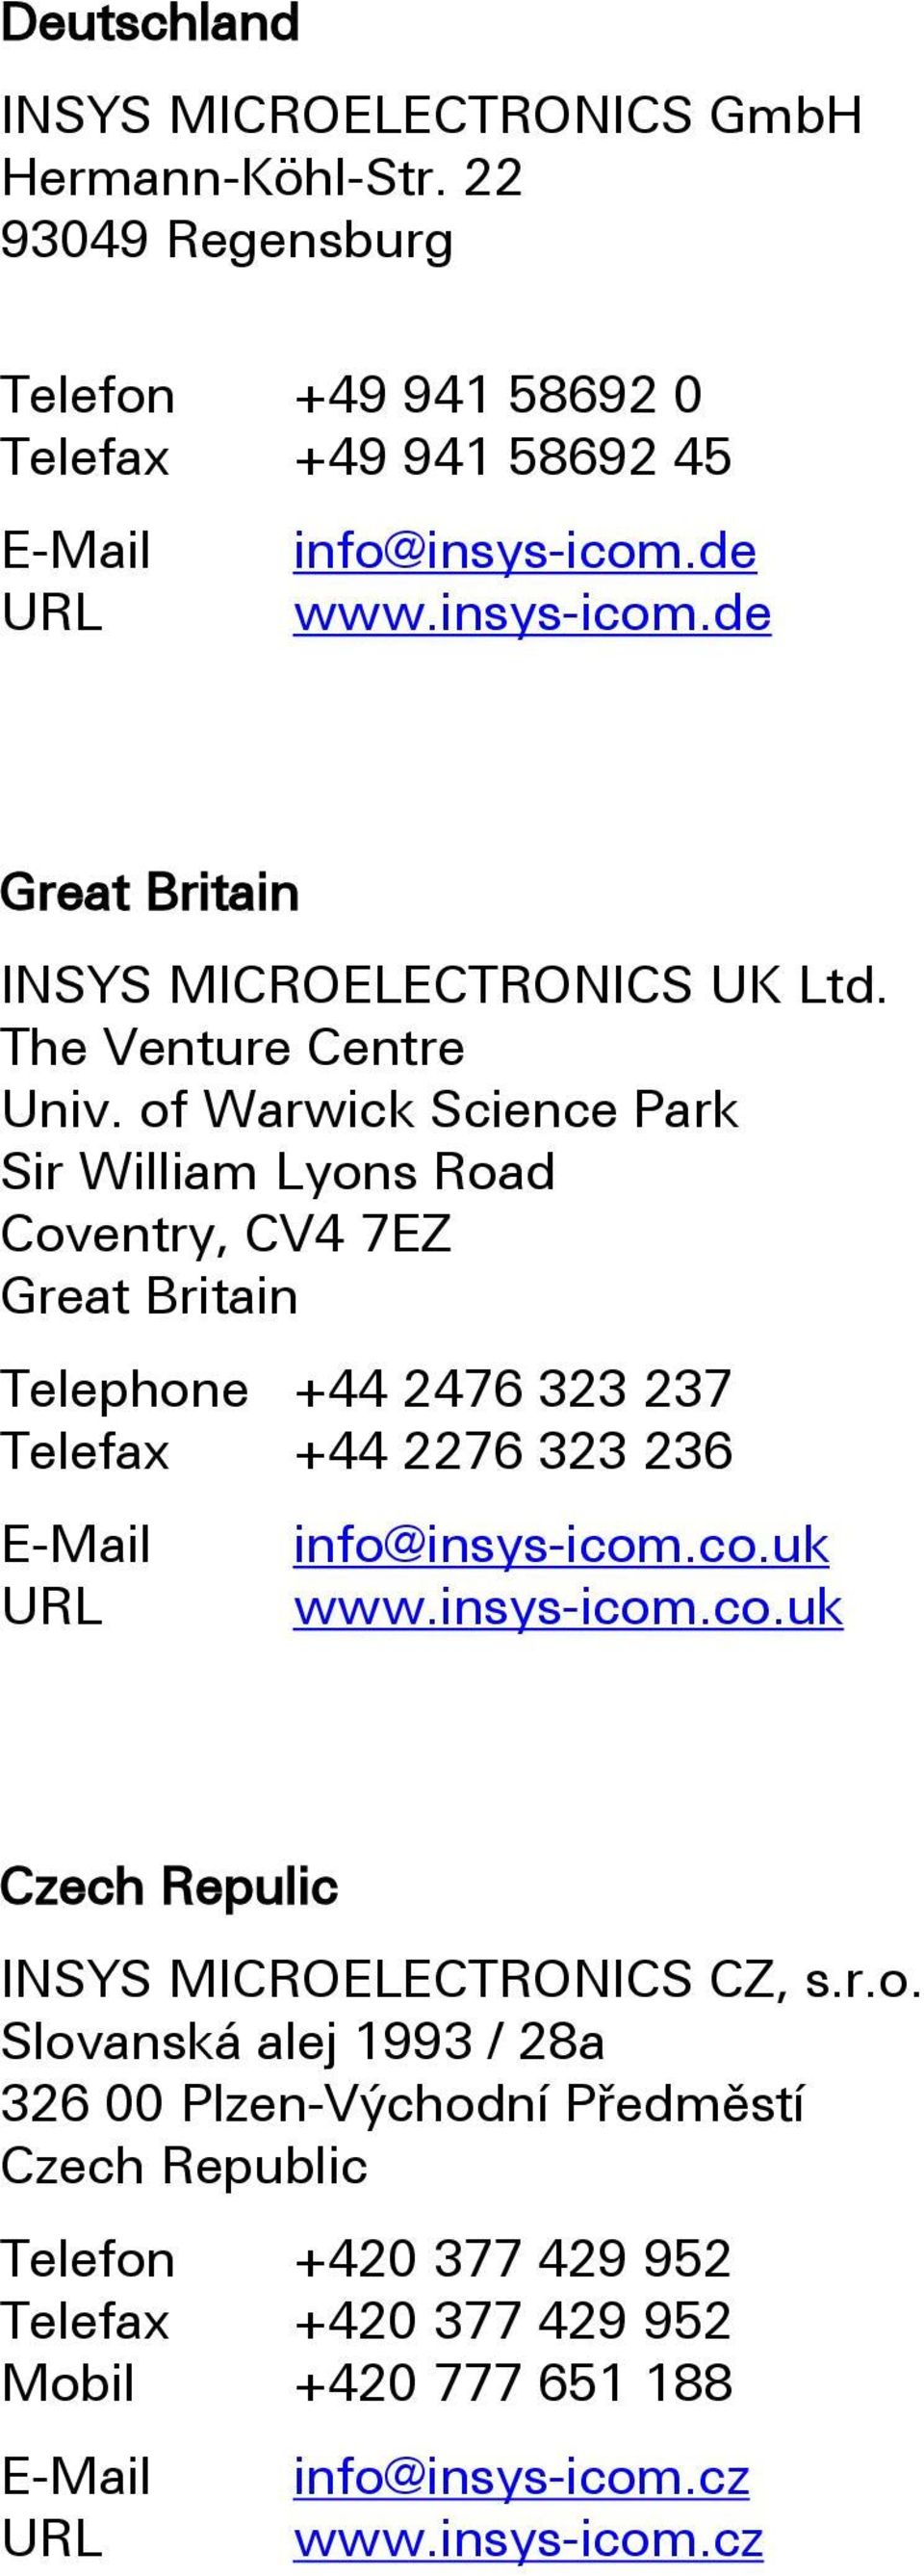 of Warwick Science Park Sir William Lyons Road Coventry, CV4 7EZ Great Britain Telephone +44 2476 323 237 Telefax +44 2276 323 236 E-Mail URL info@insys-icom.co.uk www.